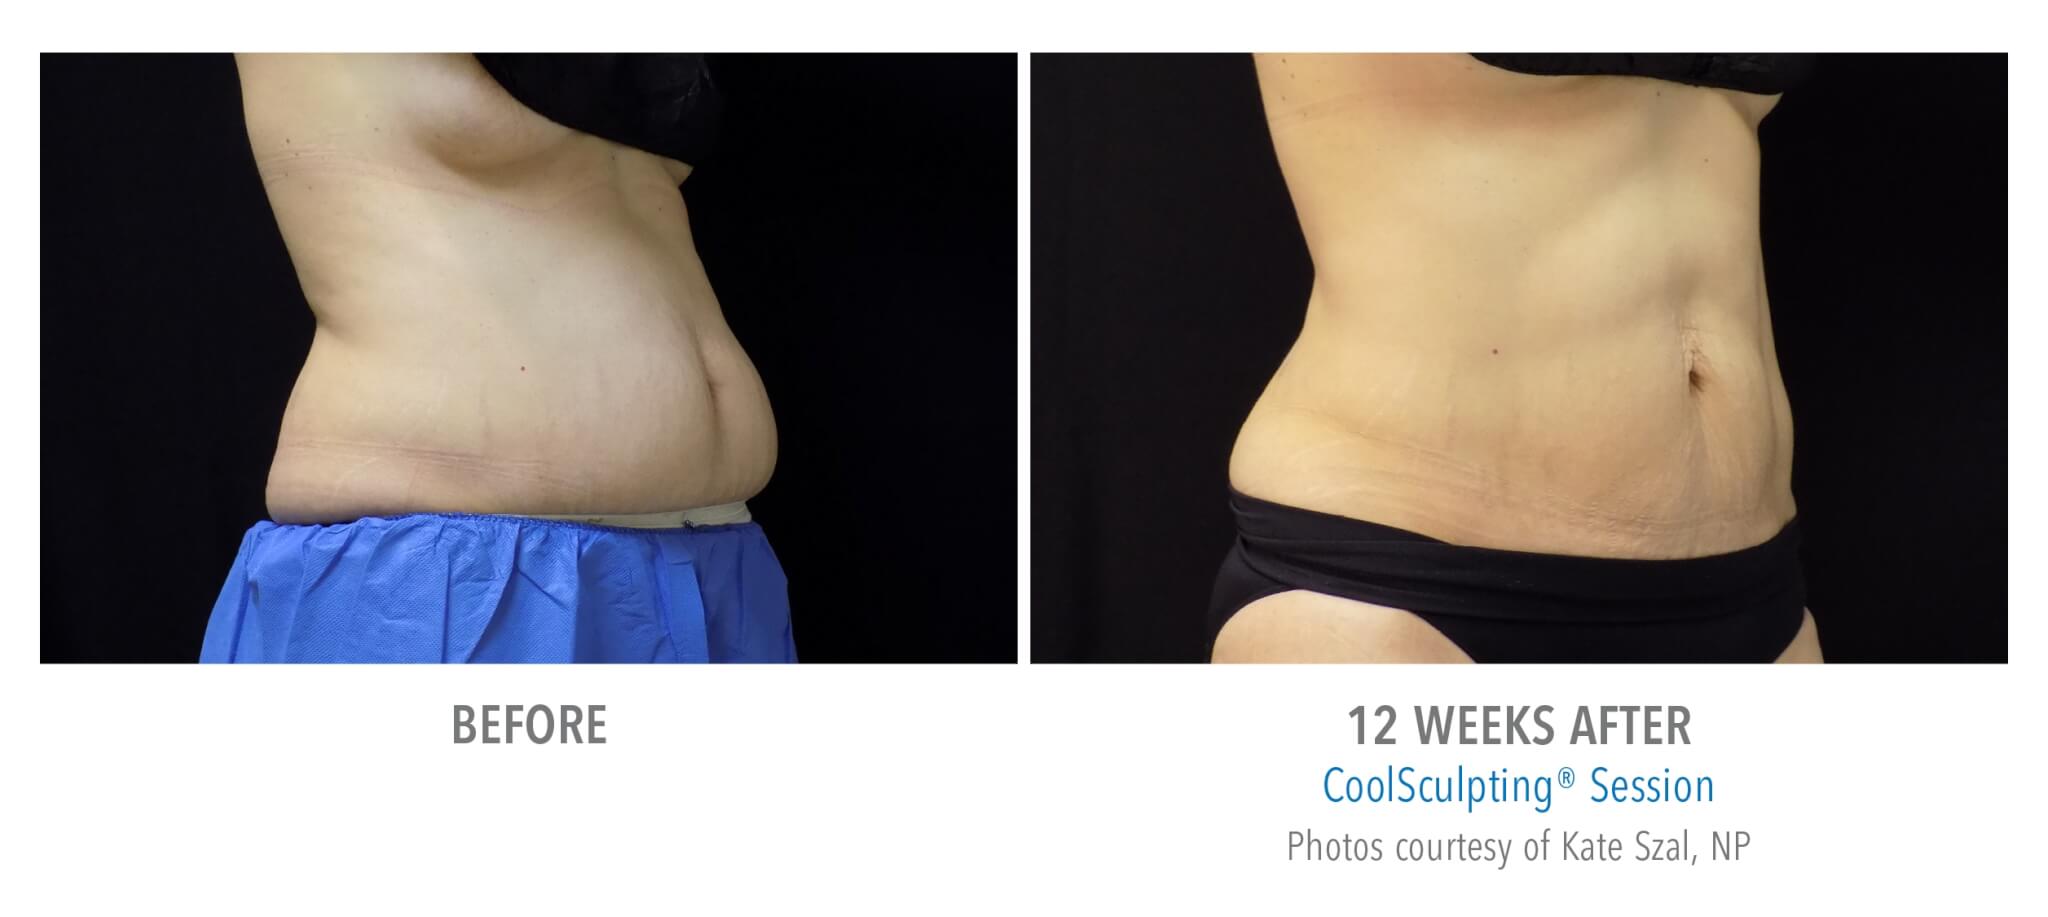 pt46-1 coolsculpting patient before and after